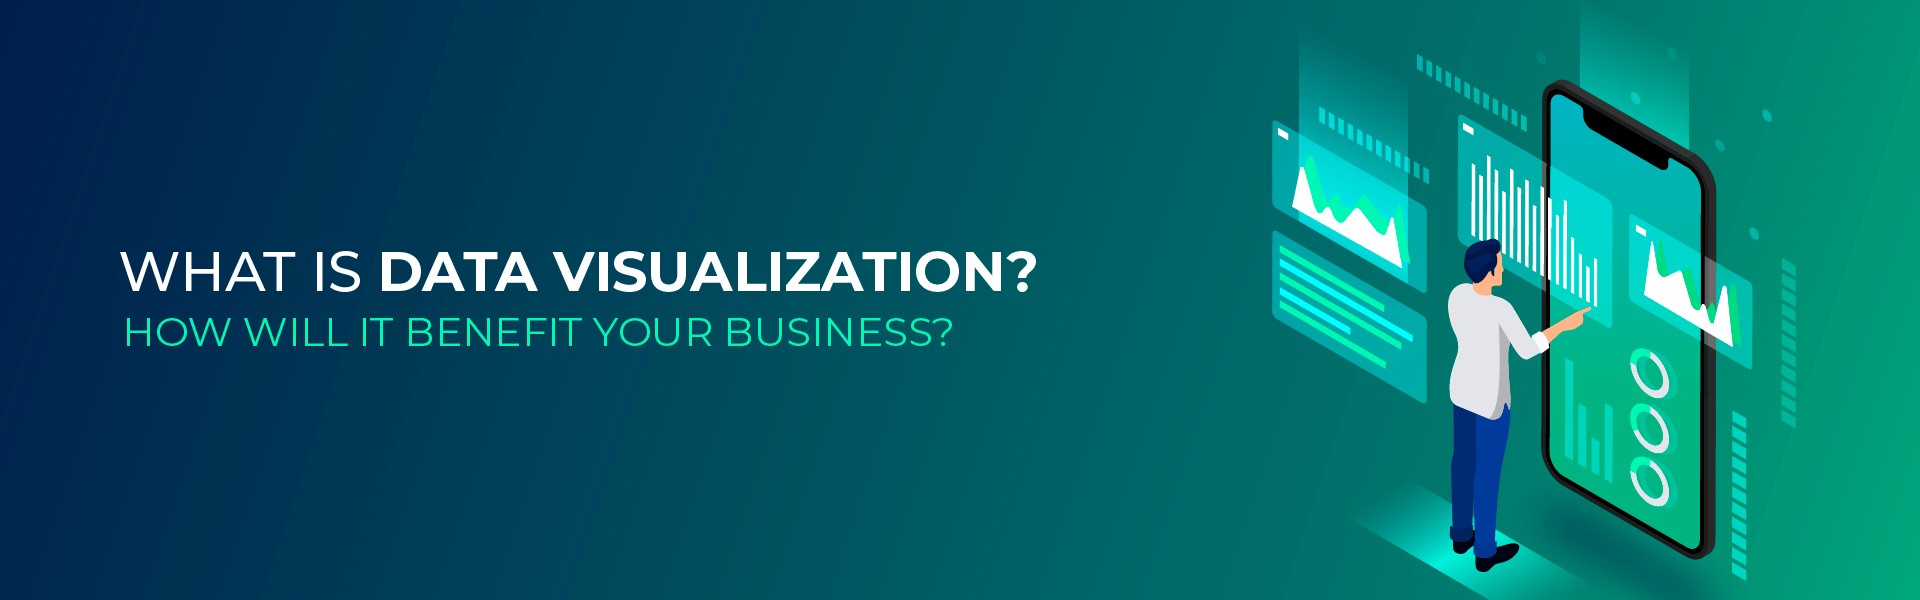 What is Data Visualization? How will it benefit your business?